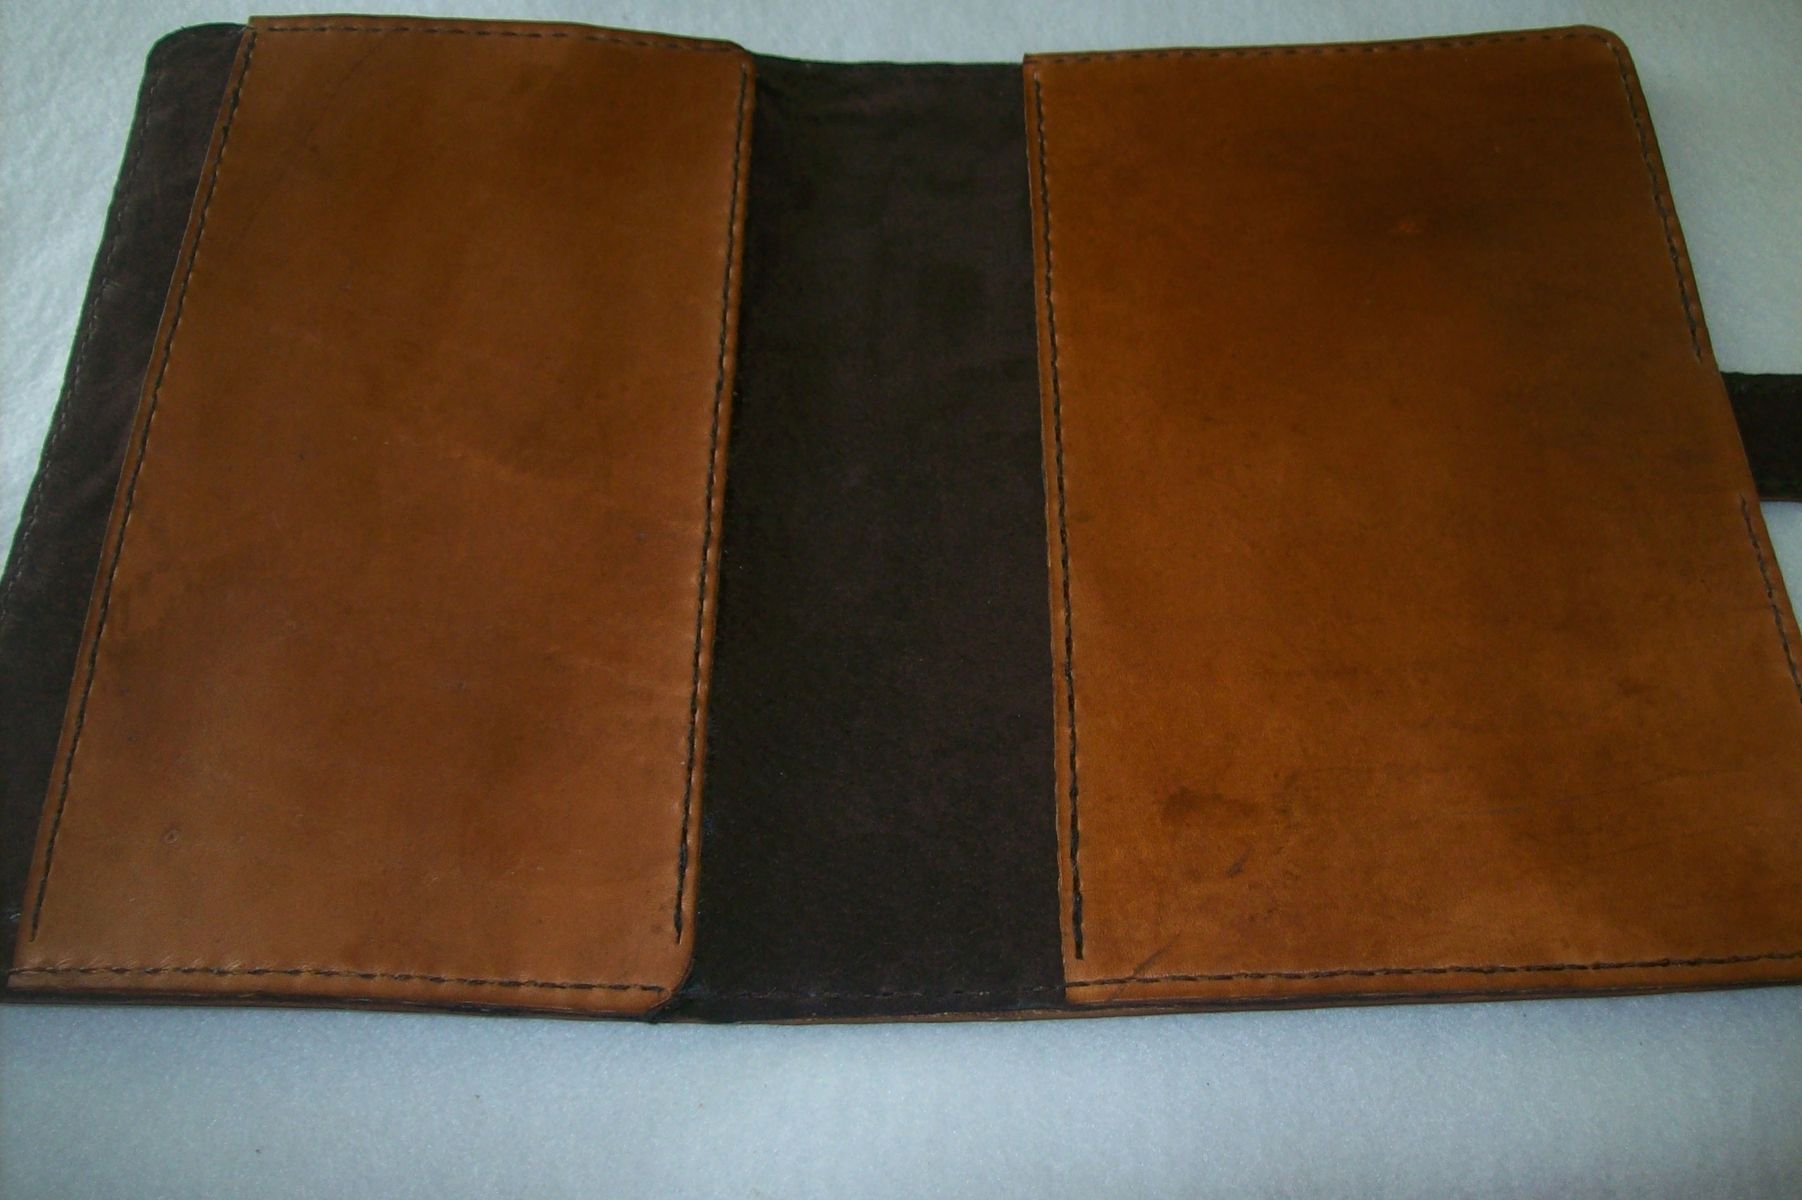 Buy Custom Leather Book Cover For Two Books, made to order from Kerry's